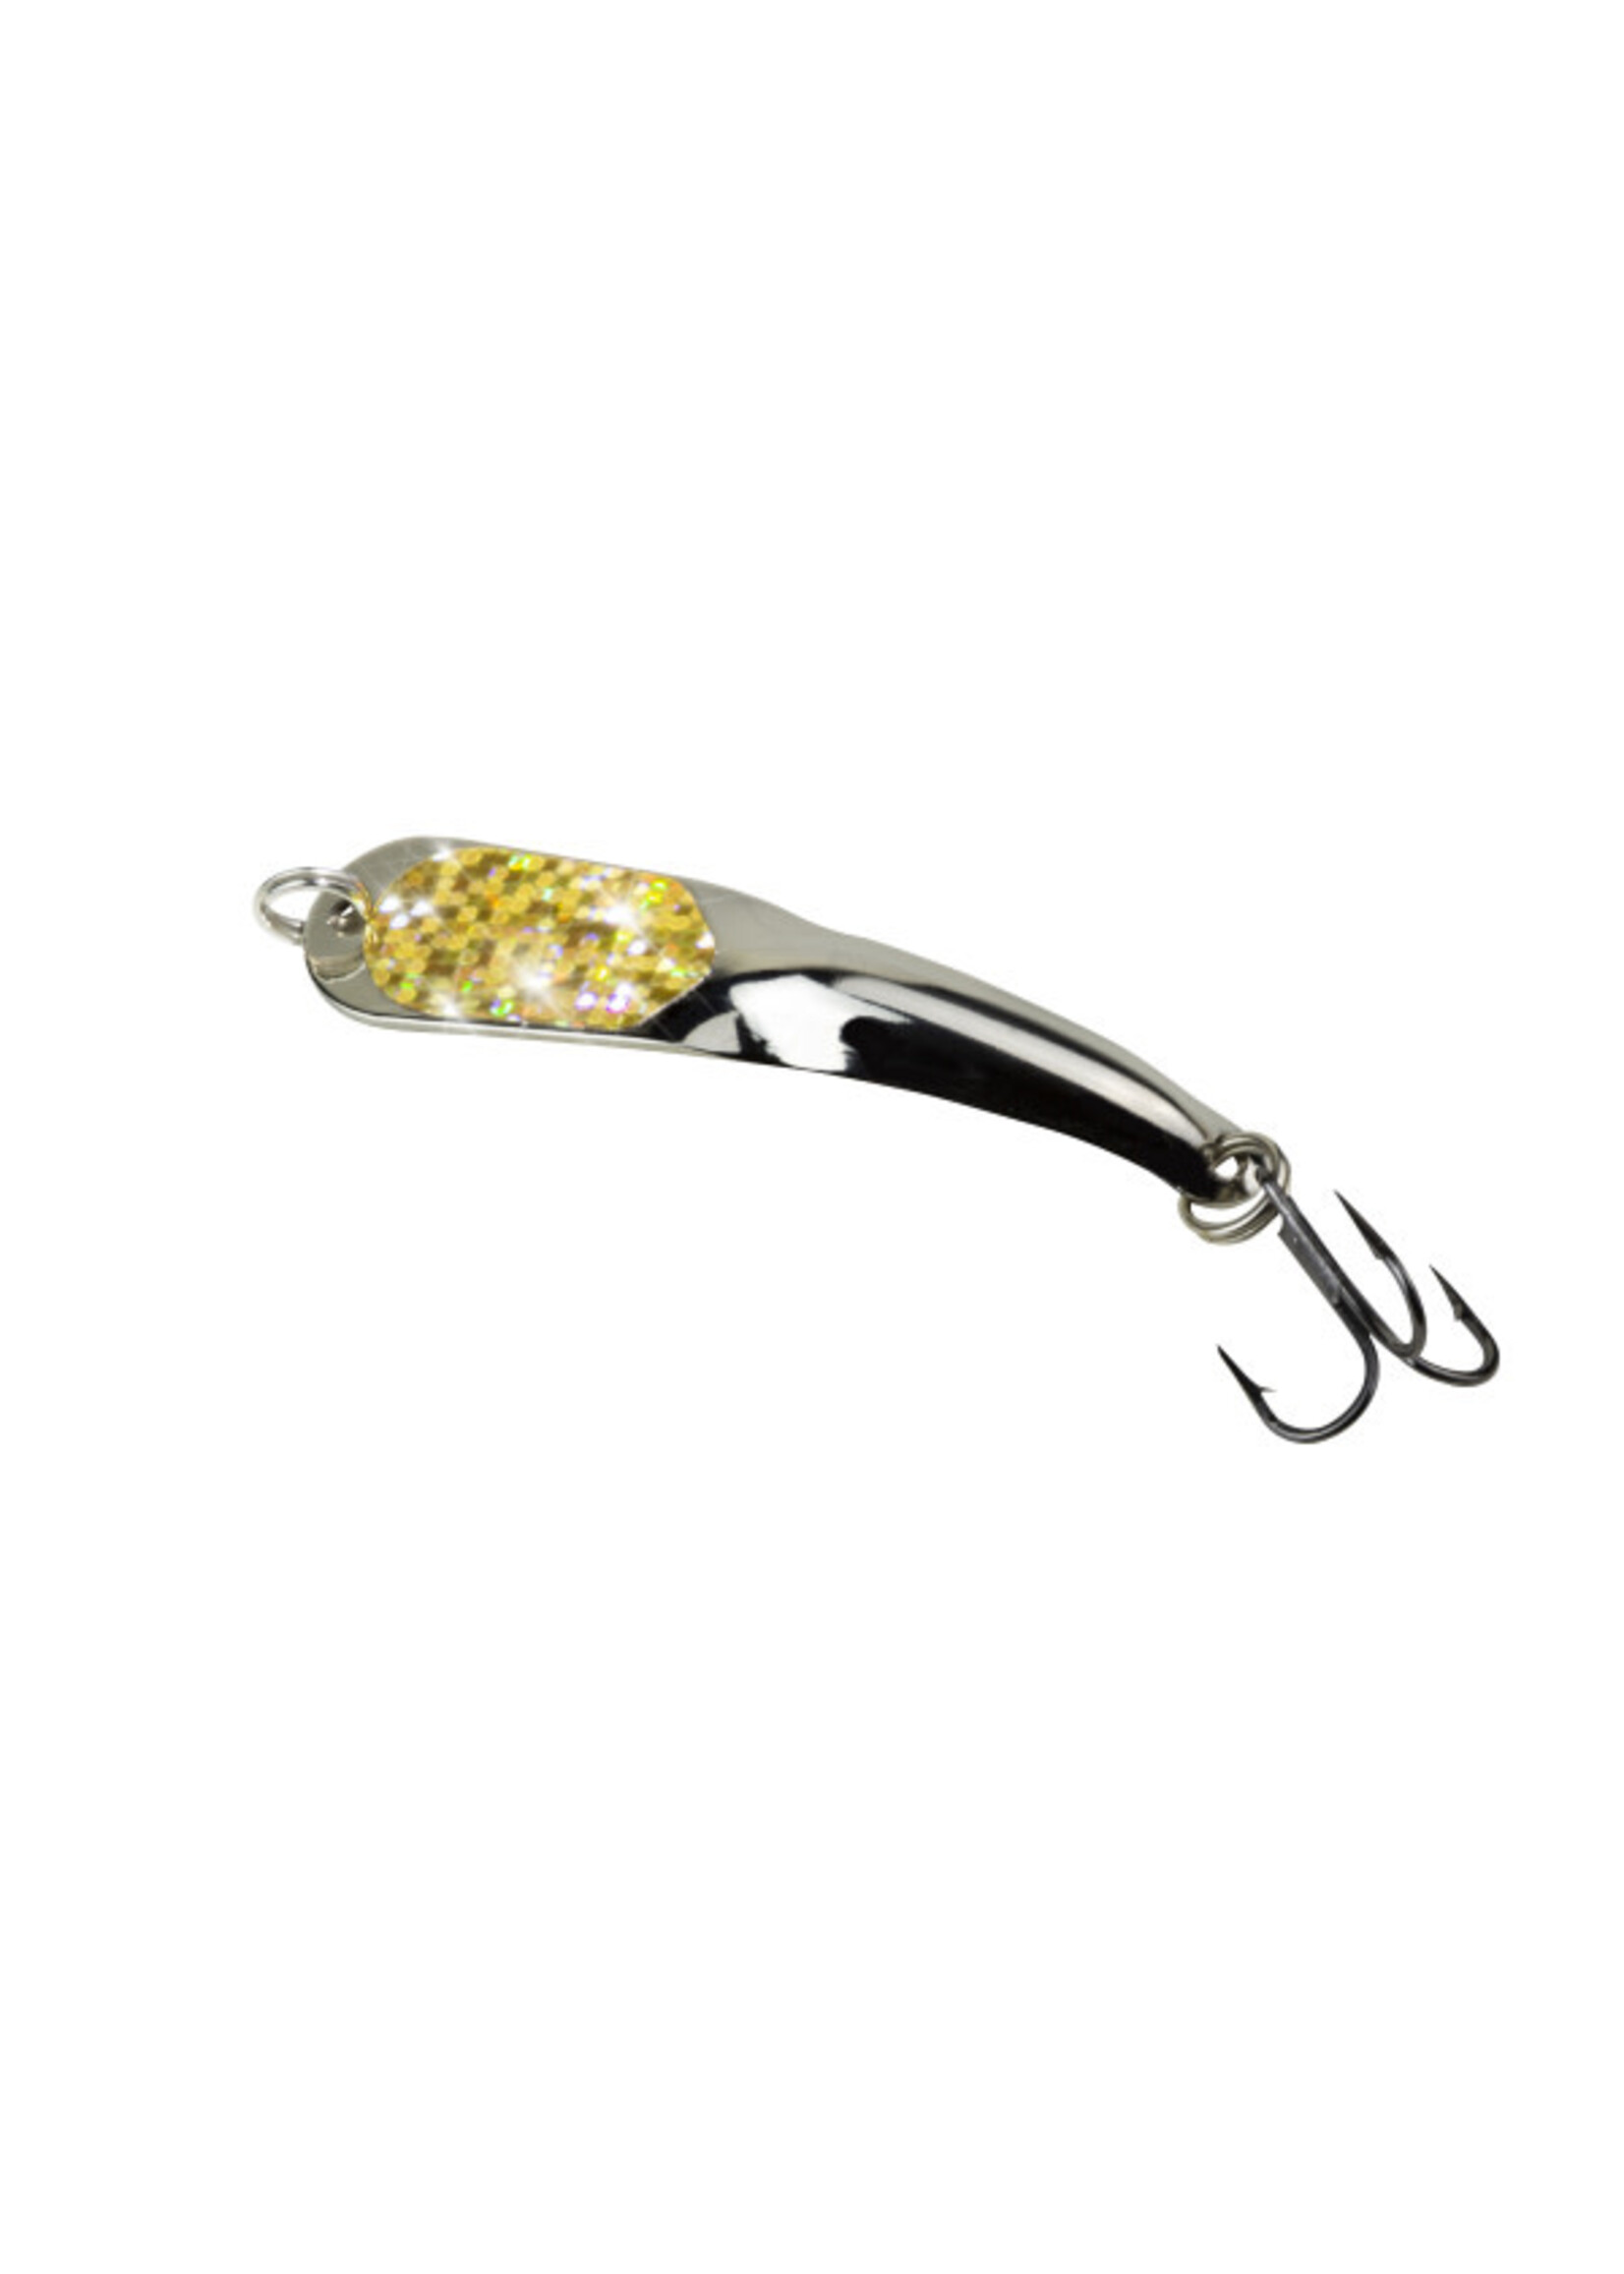 Iron Decoy TROUTSMITH 2 Gold/Pink / 1/10 oz